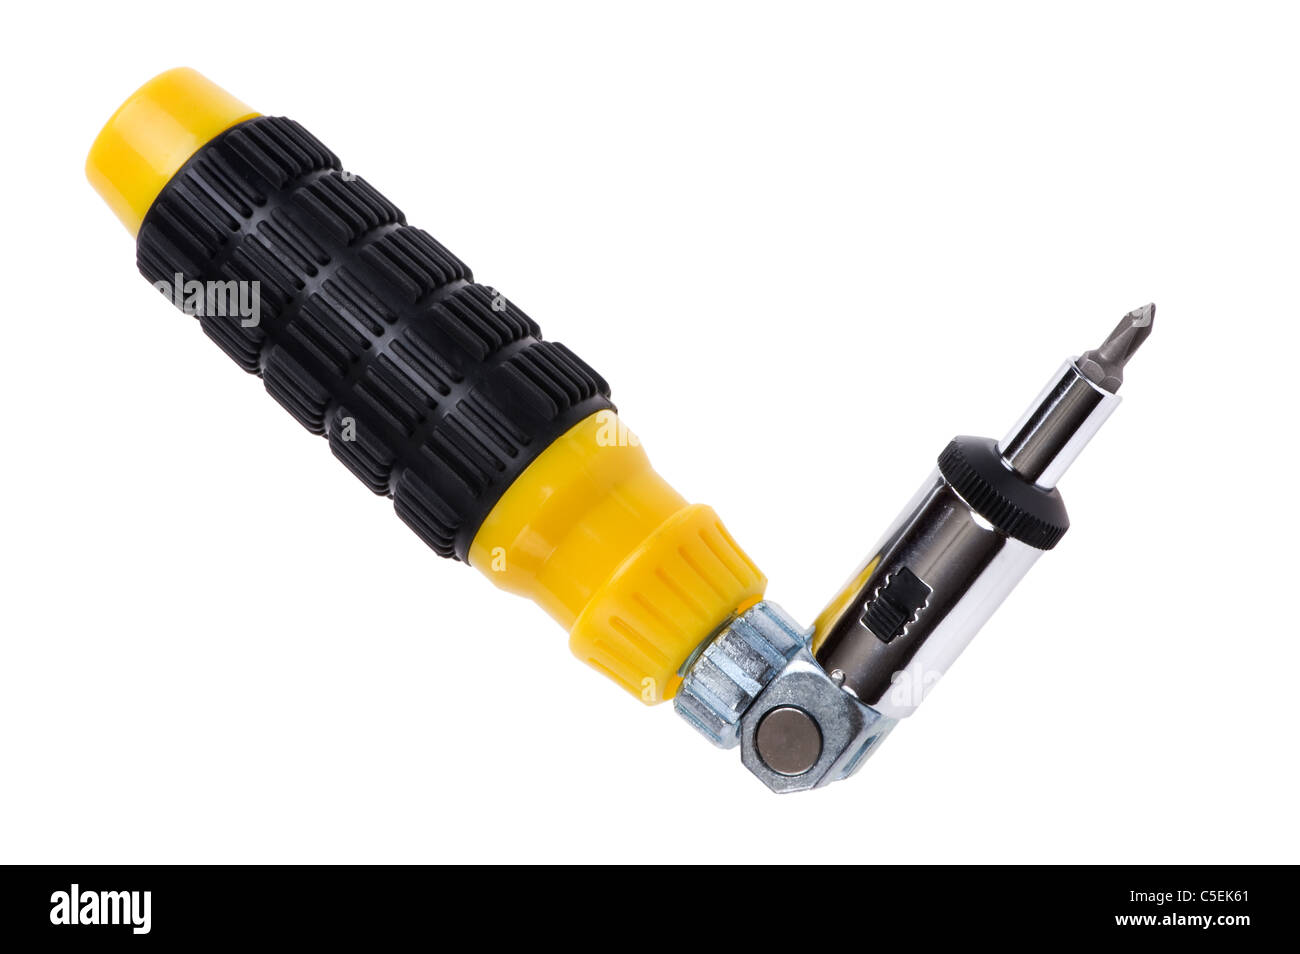 object on white - isolated screwdriver close up Stock Photo